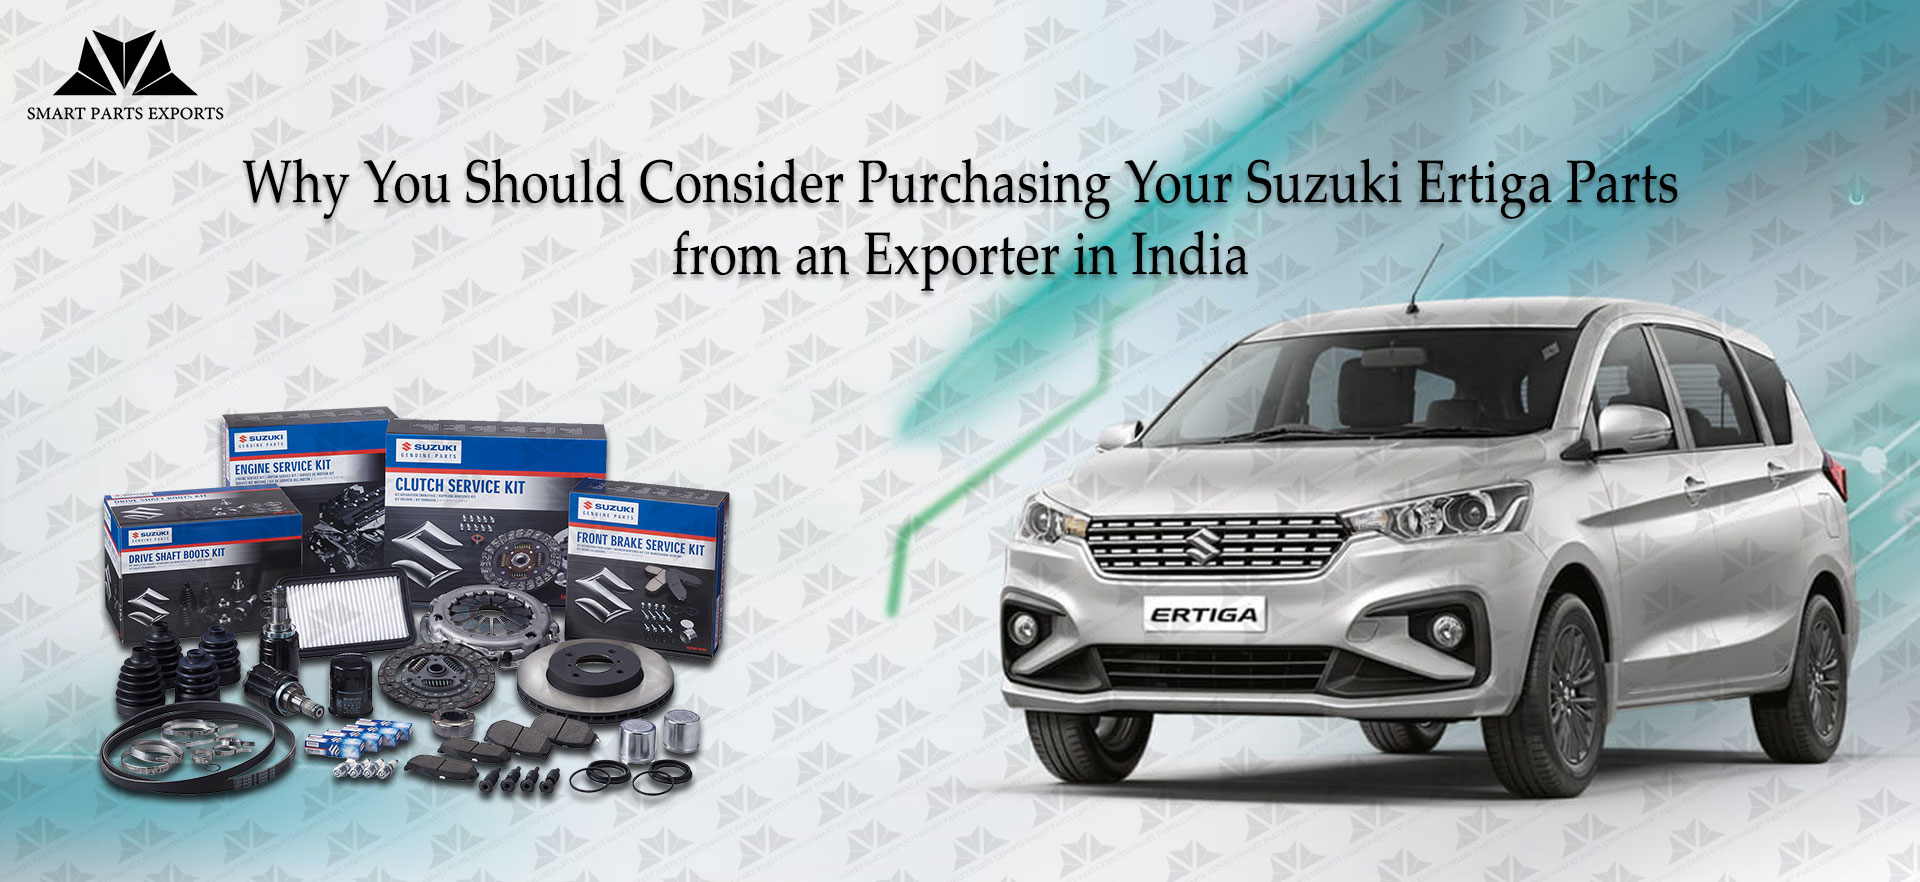 Why You Should Consider Purchasing Your Suzuki Ertiga Parts from an Exporter in India